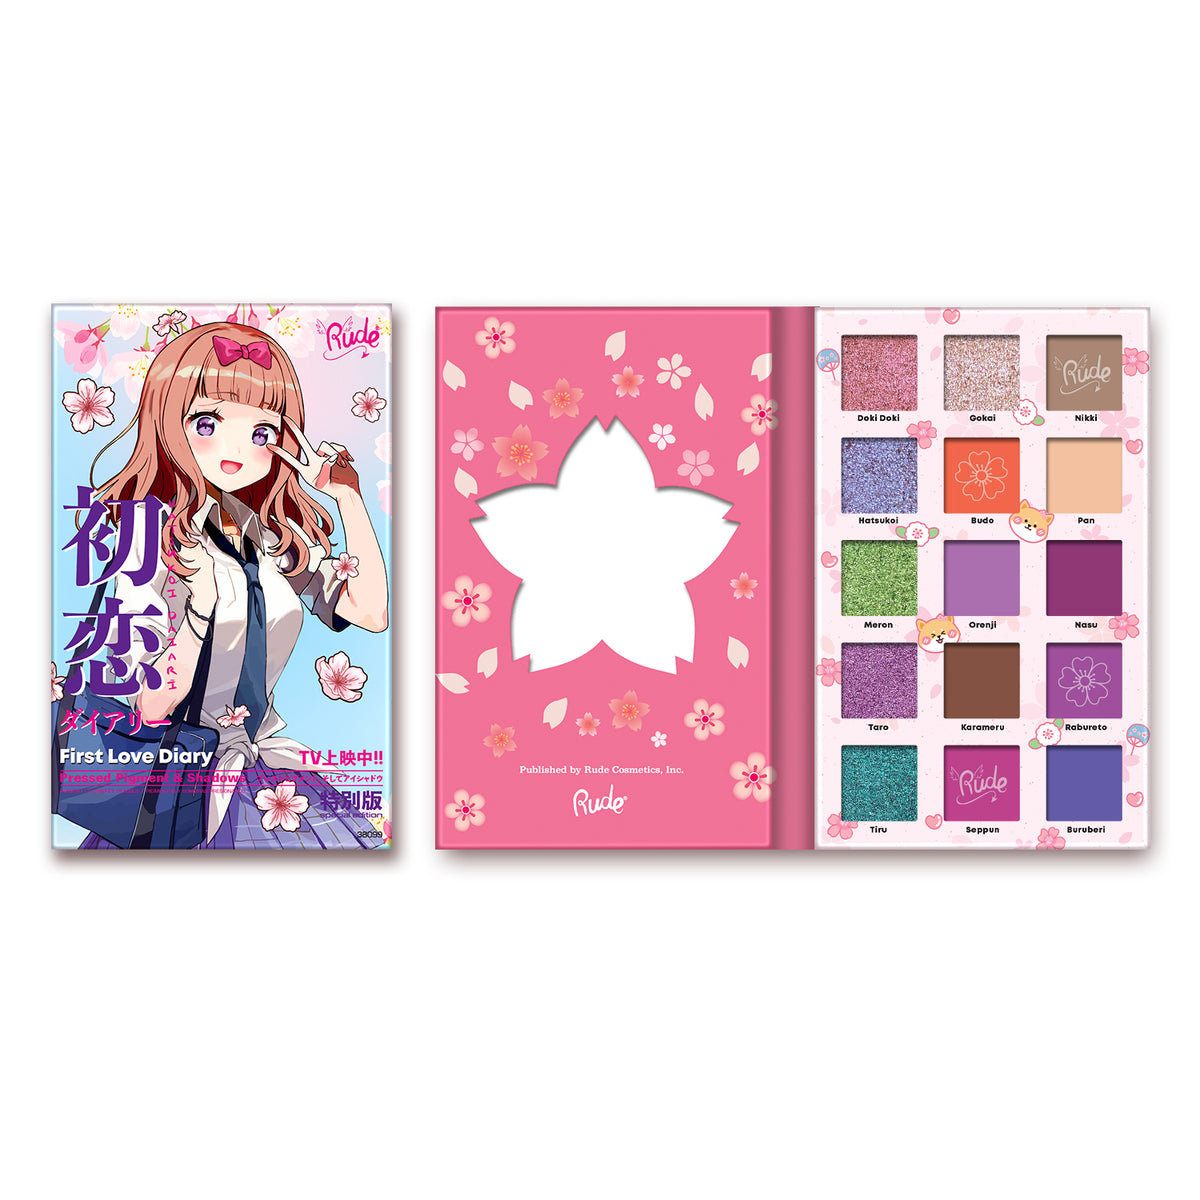 Manga Collection Pressed Pigments & Shadows Palette - First Love Diary